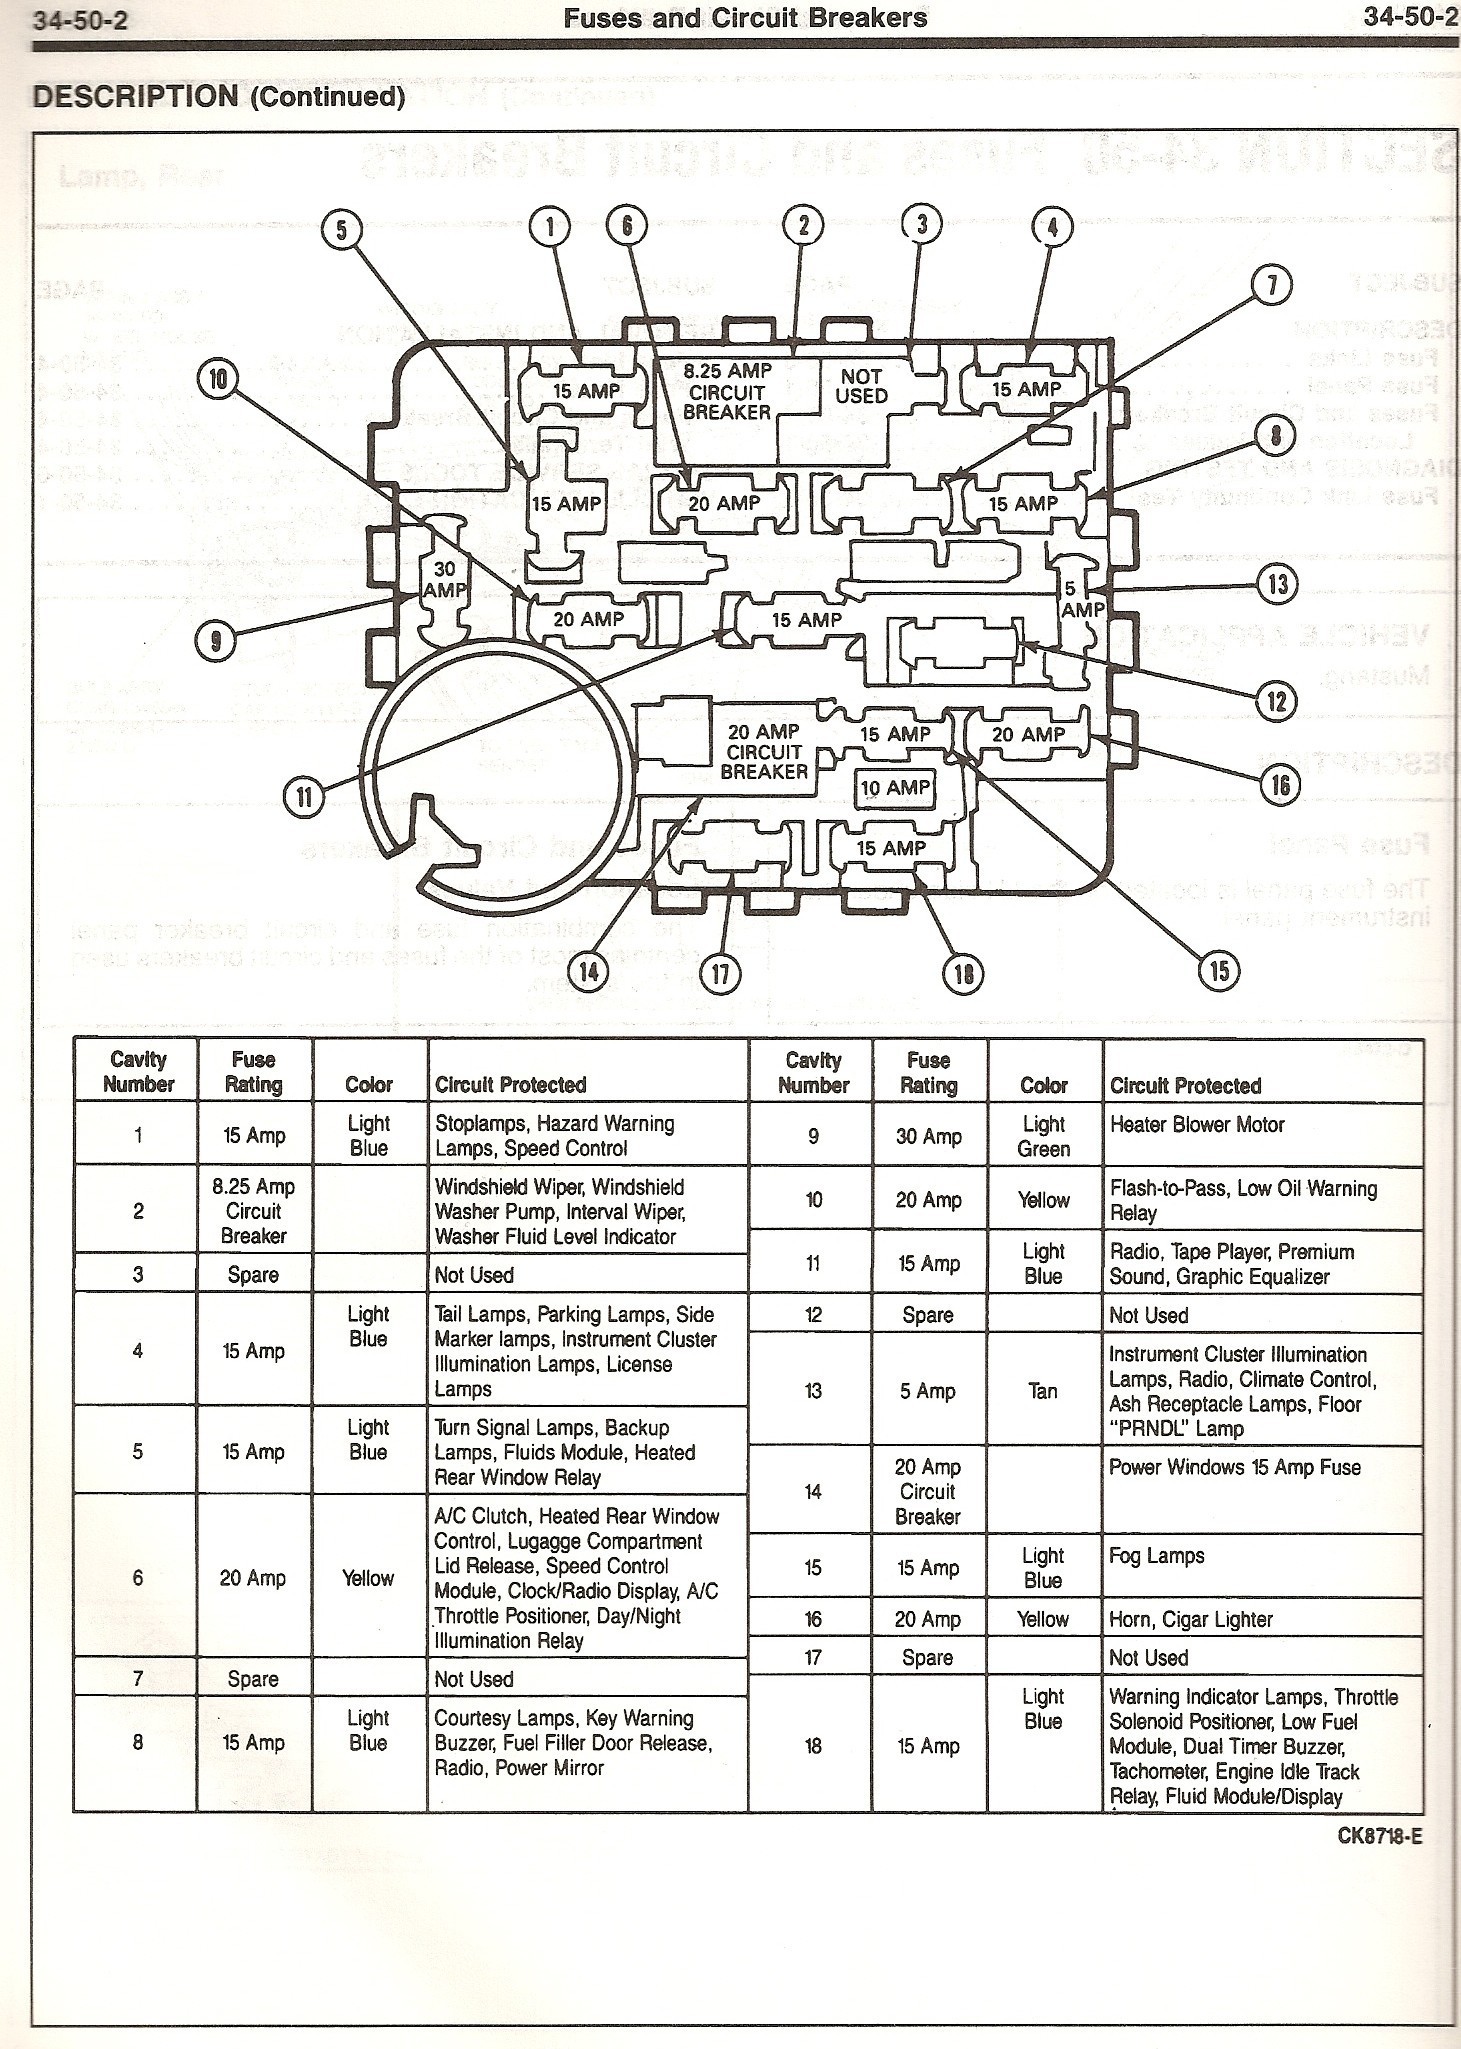 97 Ford Mustang Fuse Box Diagram Wiring Schematic Diagram